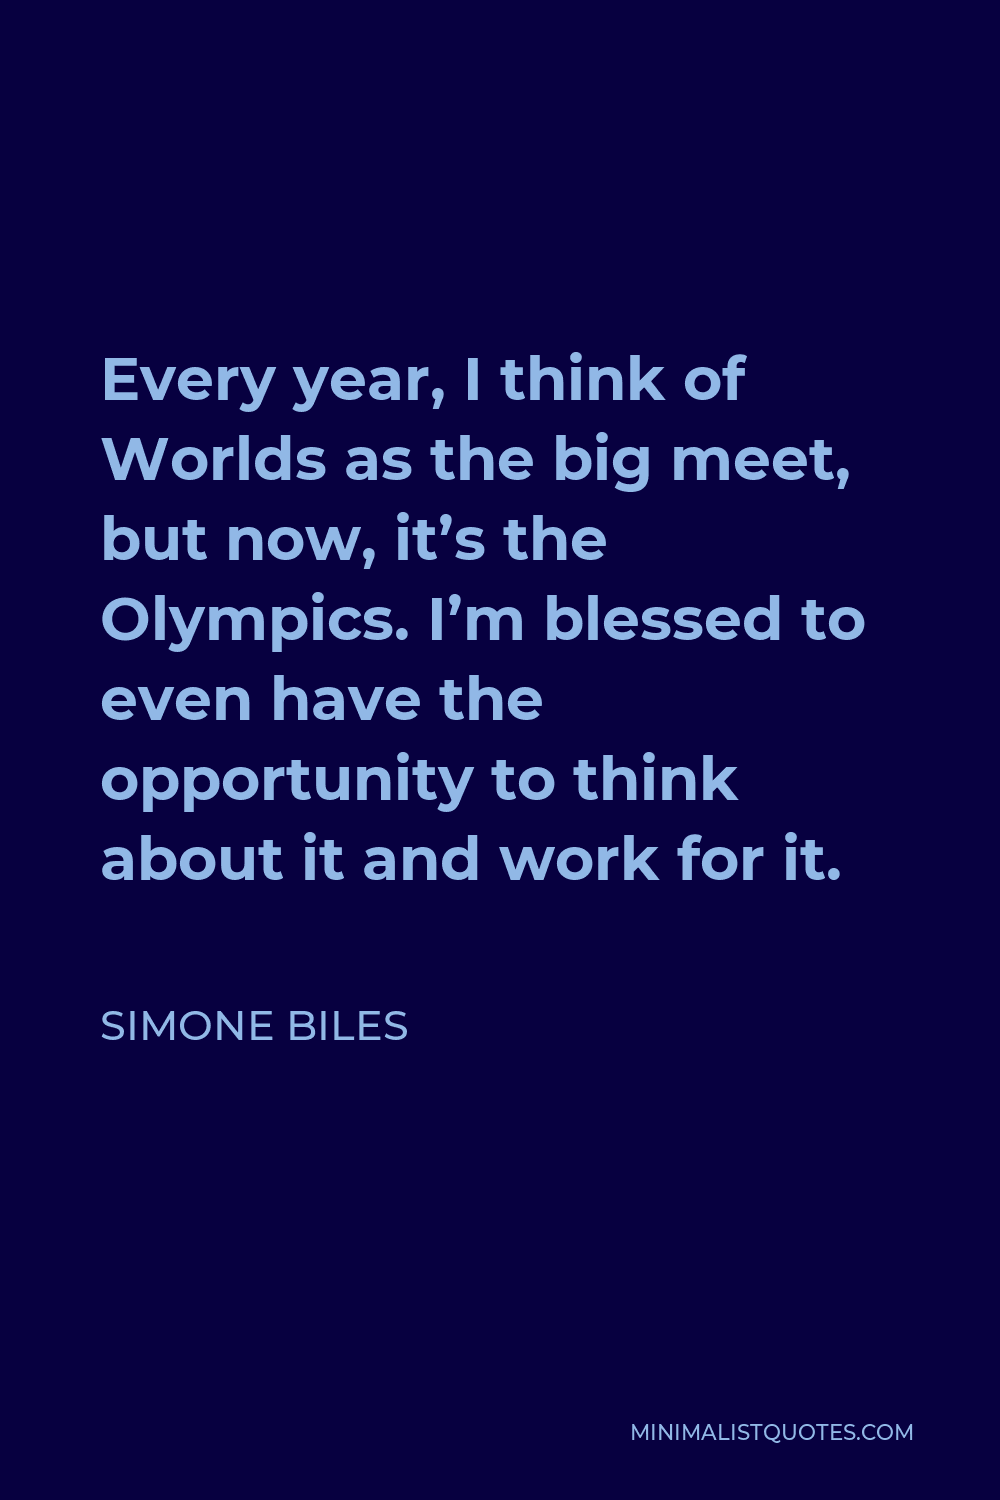 Simone Biles Quote - Every year, I think of Worlds as the big meet, but now, it’s the Olympics. I’m blessed to even have the opportunity to think about it and work for it.